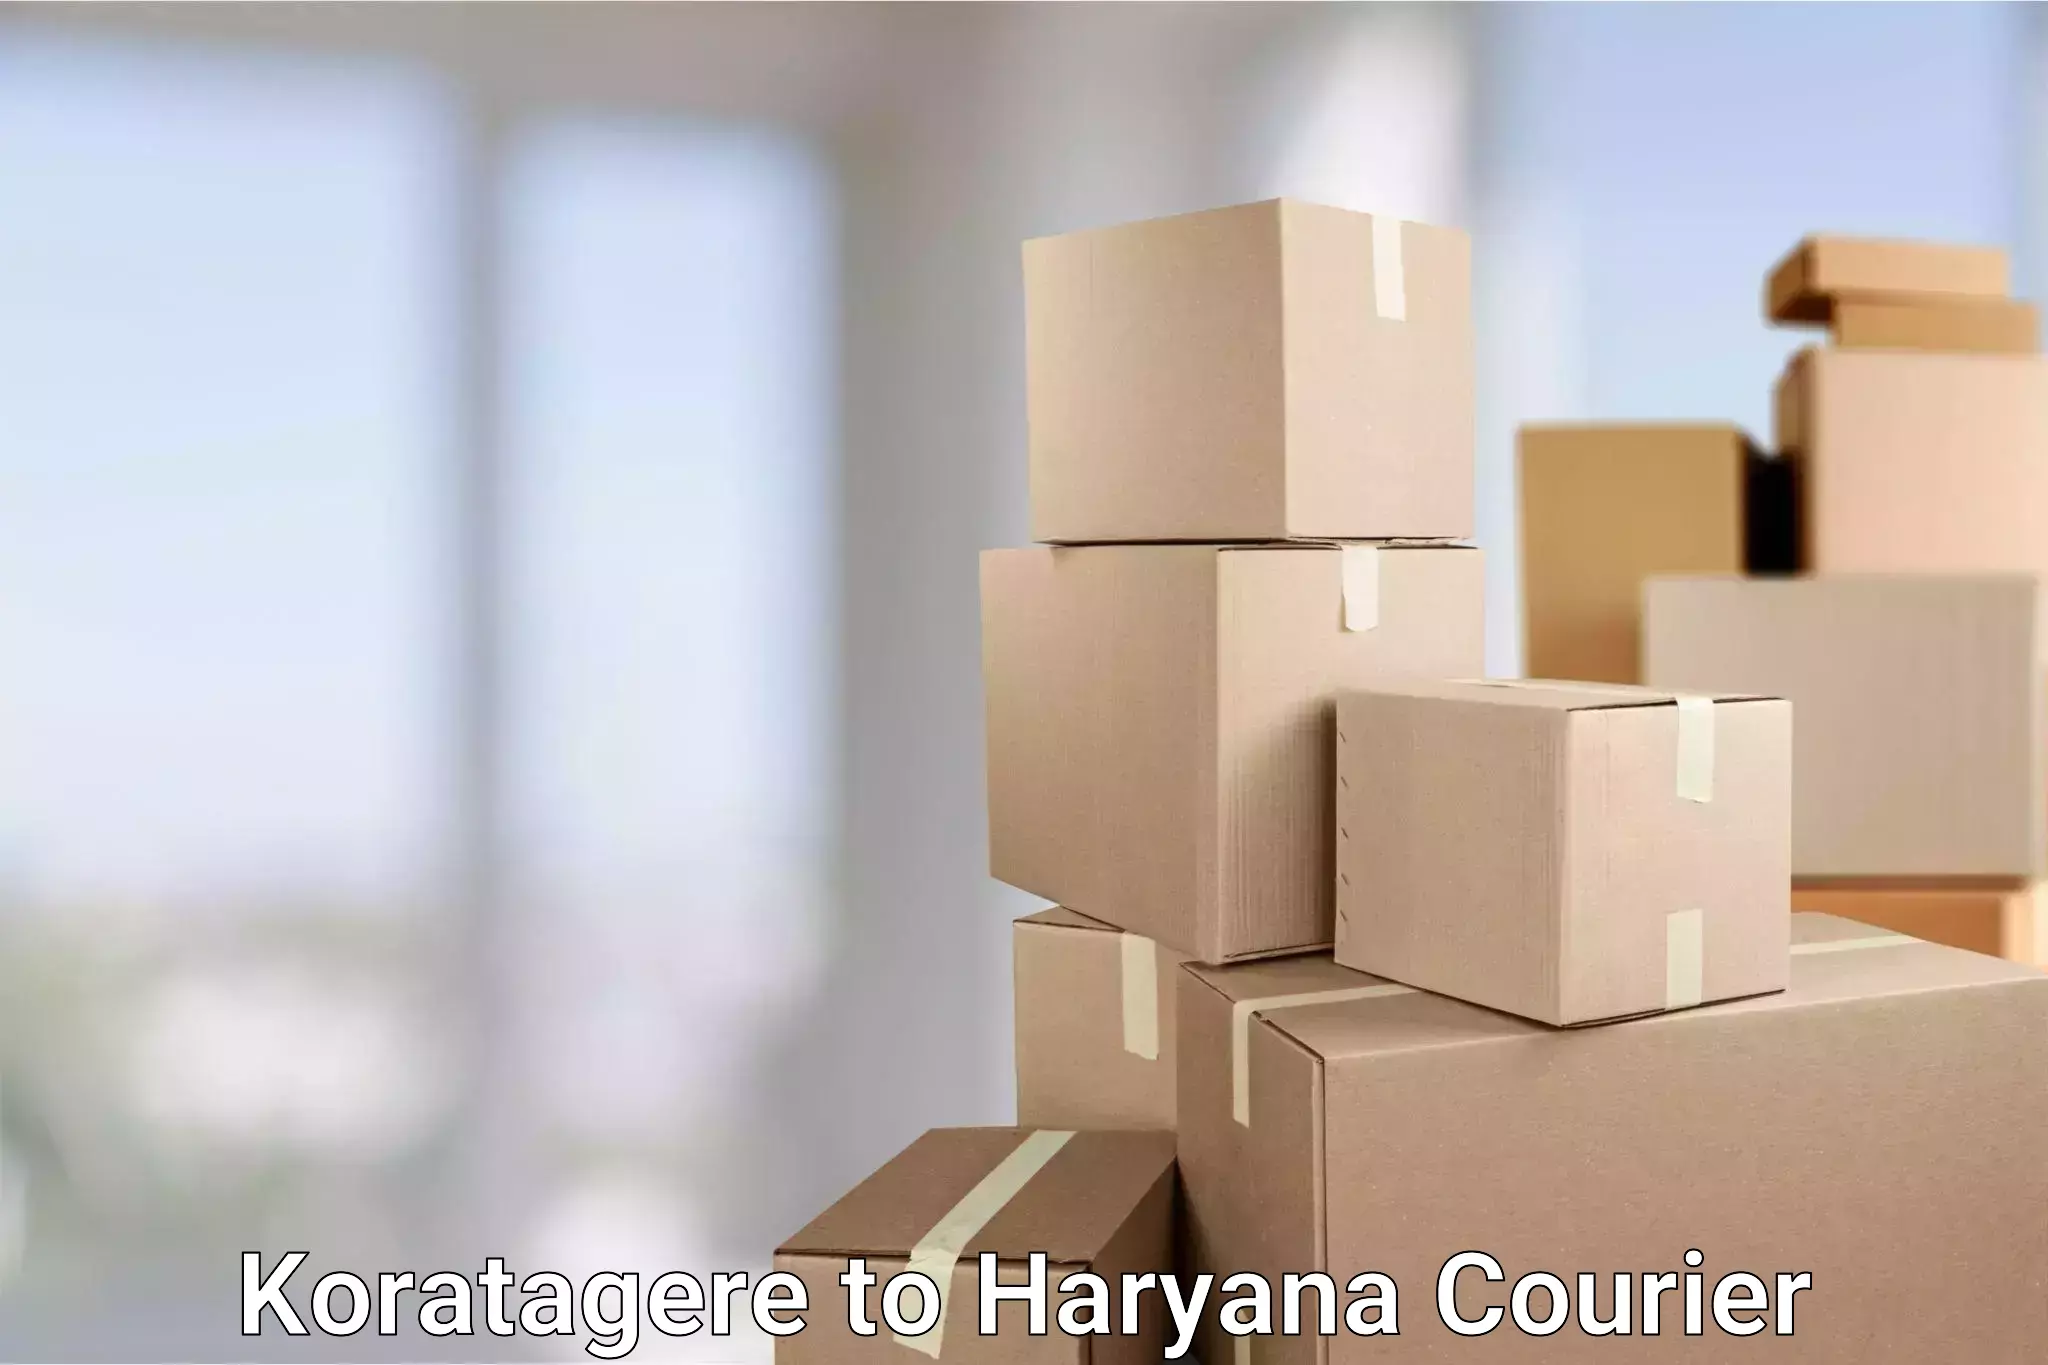 Cash on delivery service Koratagere to Haryana